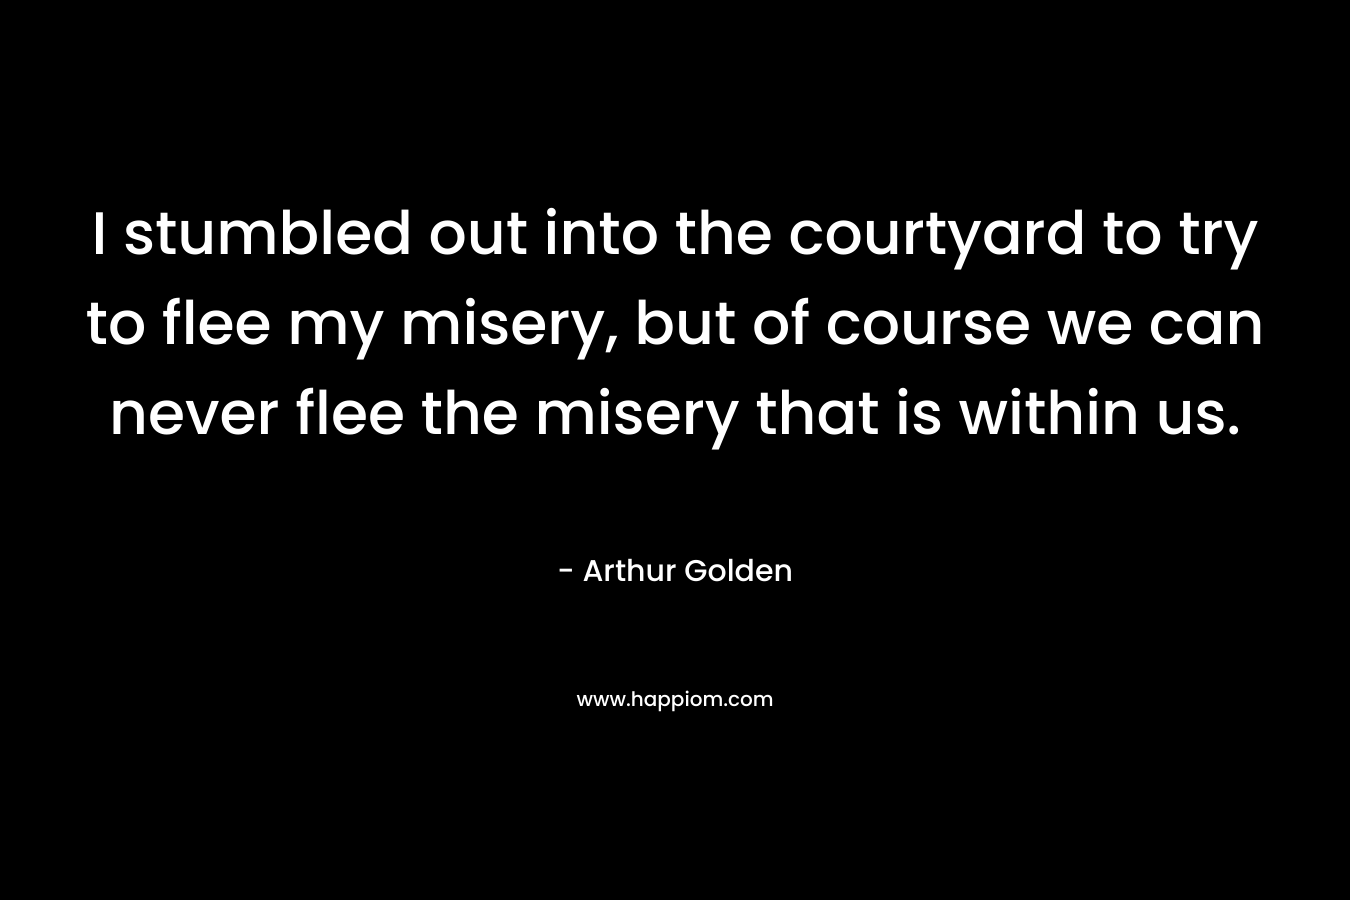 I stumbled out into the courtyard to try to flee my misery, but of course we can never flee the misery that is within us.